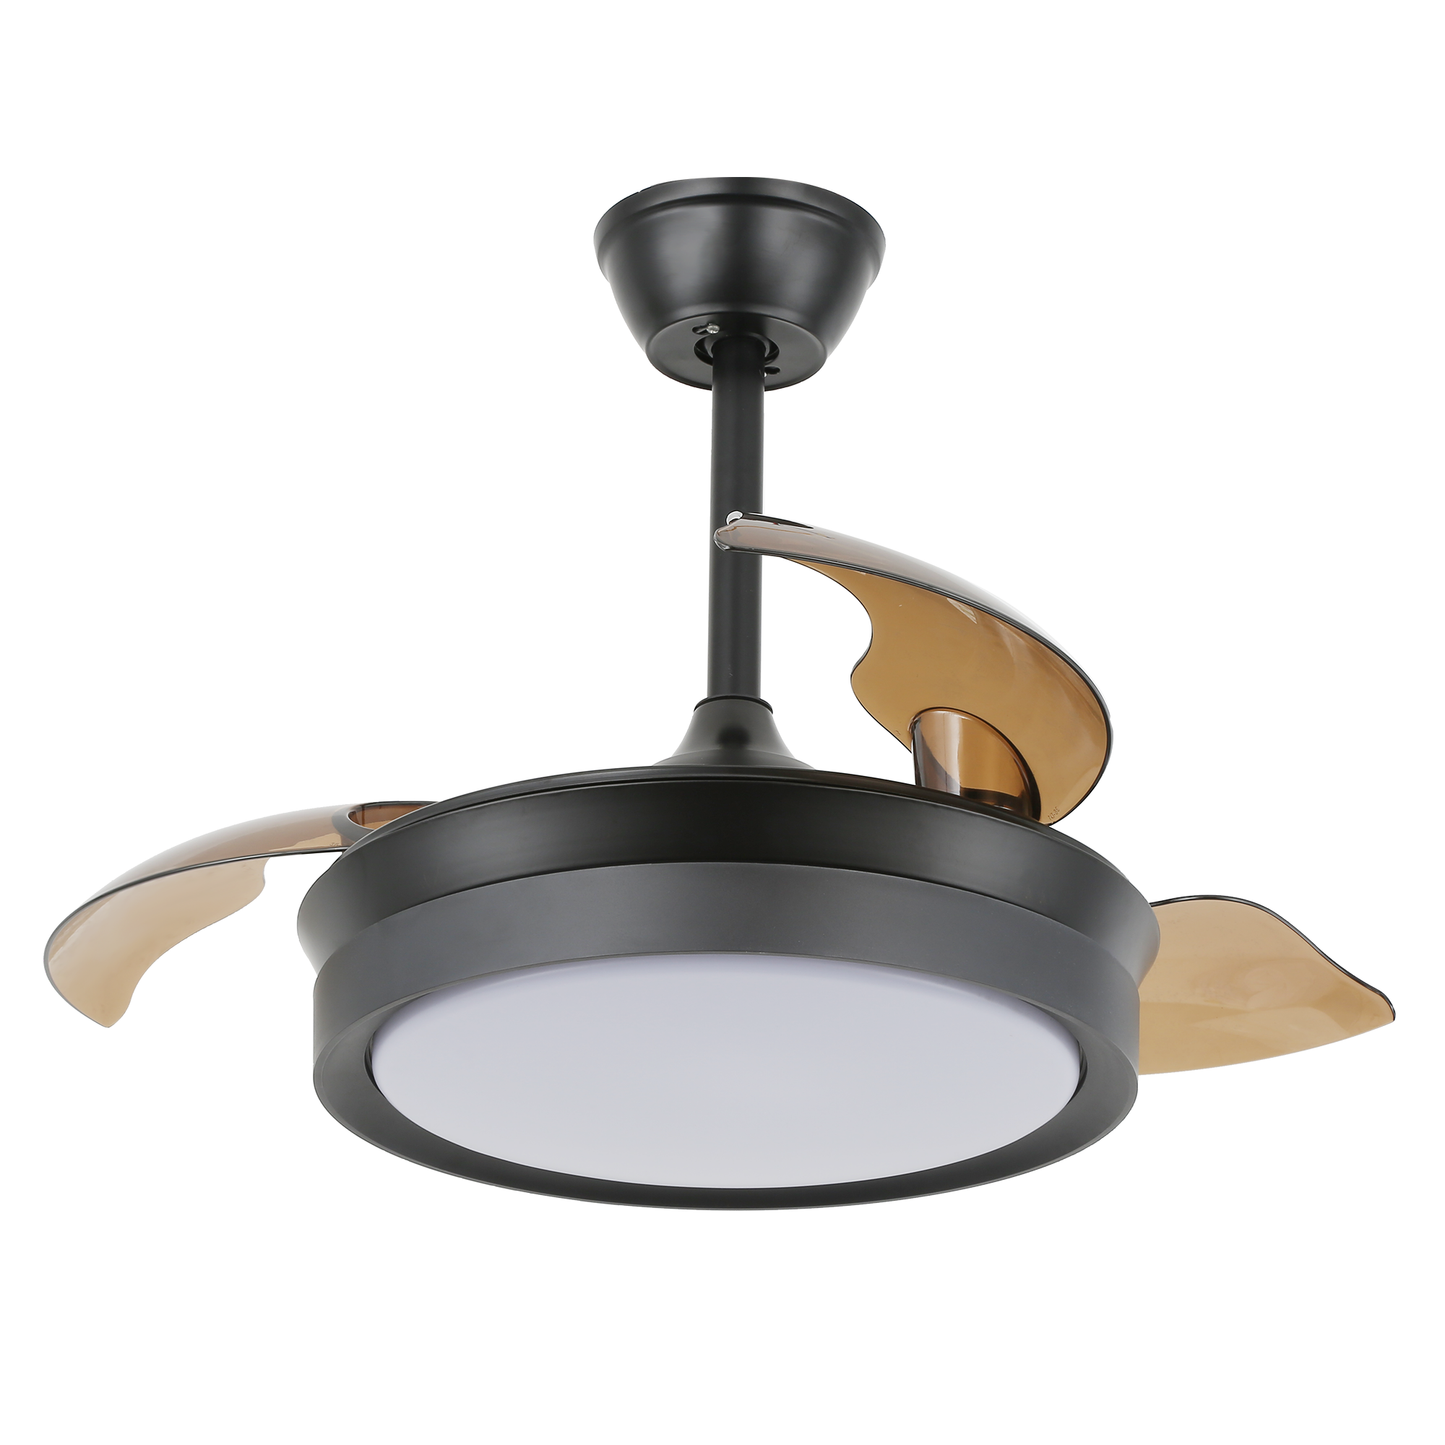 36" Dimmable Ceiling Fan with LED Light and Remote Retractable Blades